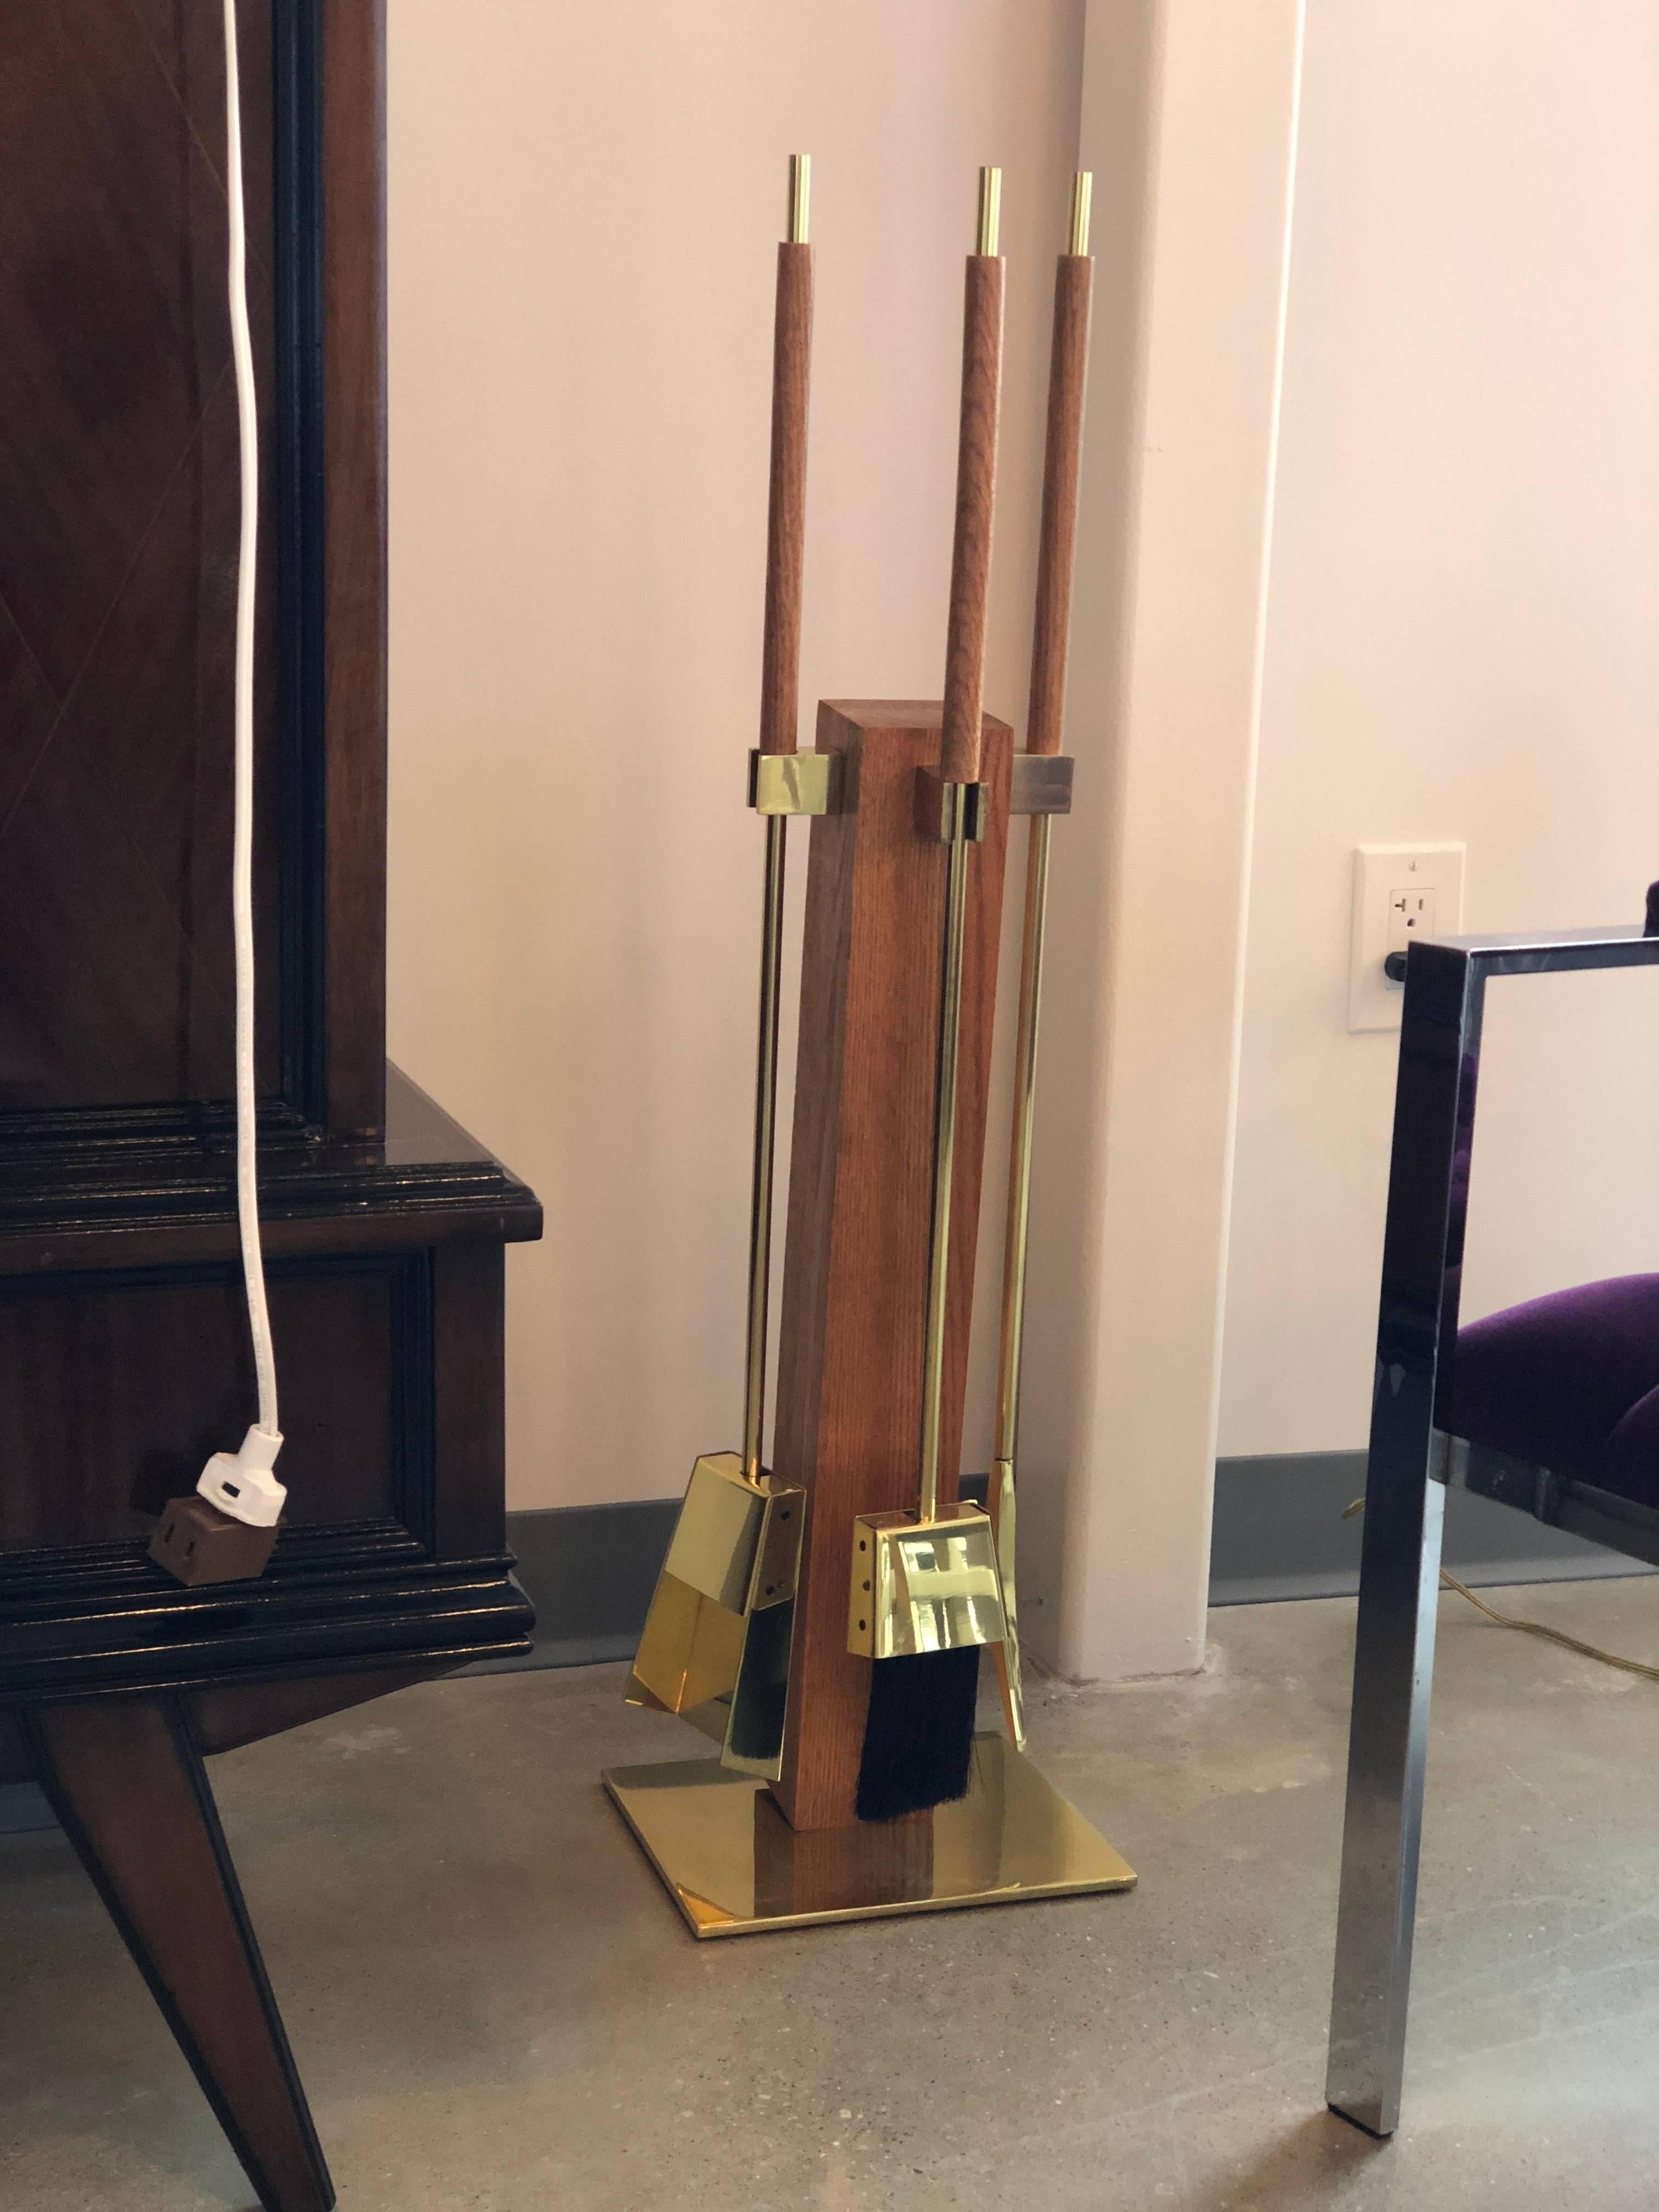 Offered is a three-piece Mid-Century Modern Italian Alessandro Albrizzi polished brass fireplace tools and stand. The set includes a gleaming brass handled brush, brass shovel and brass log poker with a beautiful oak stand.